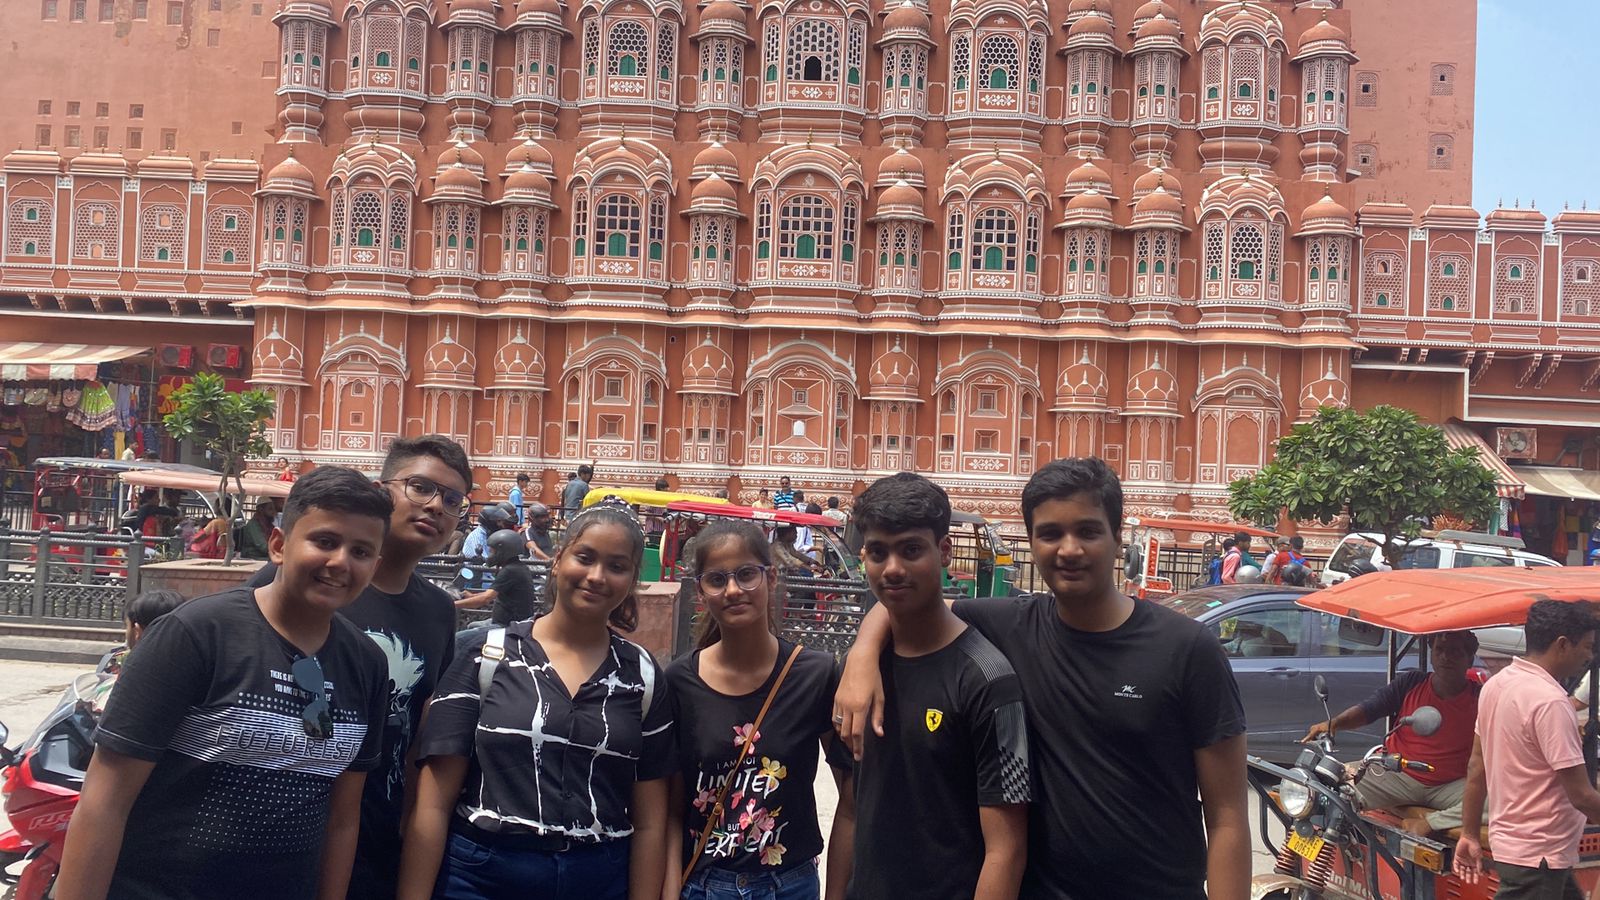 A VISIT TO PINK CITY